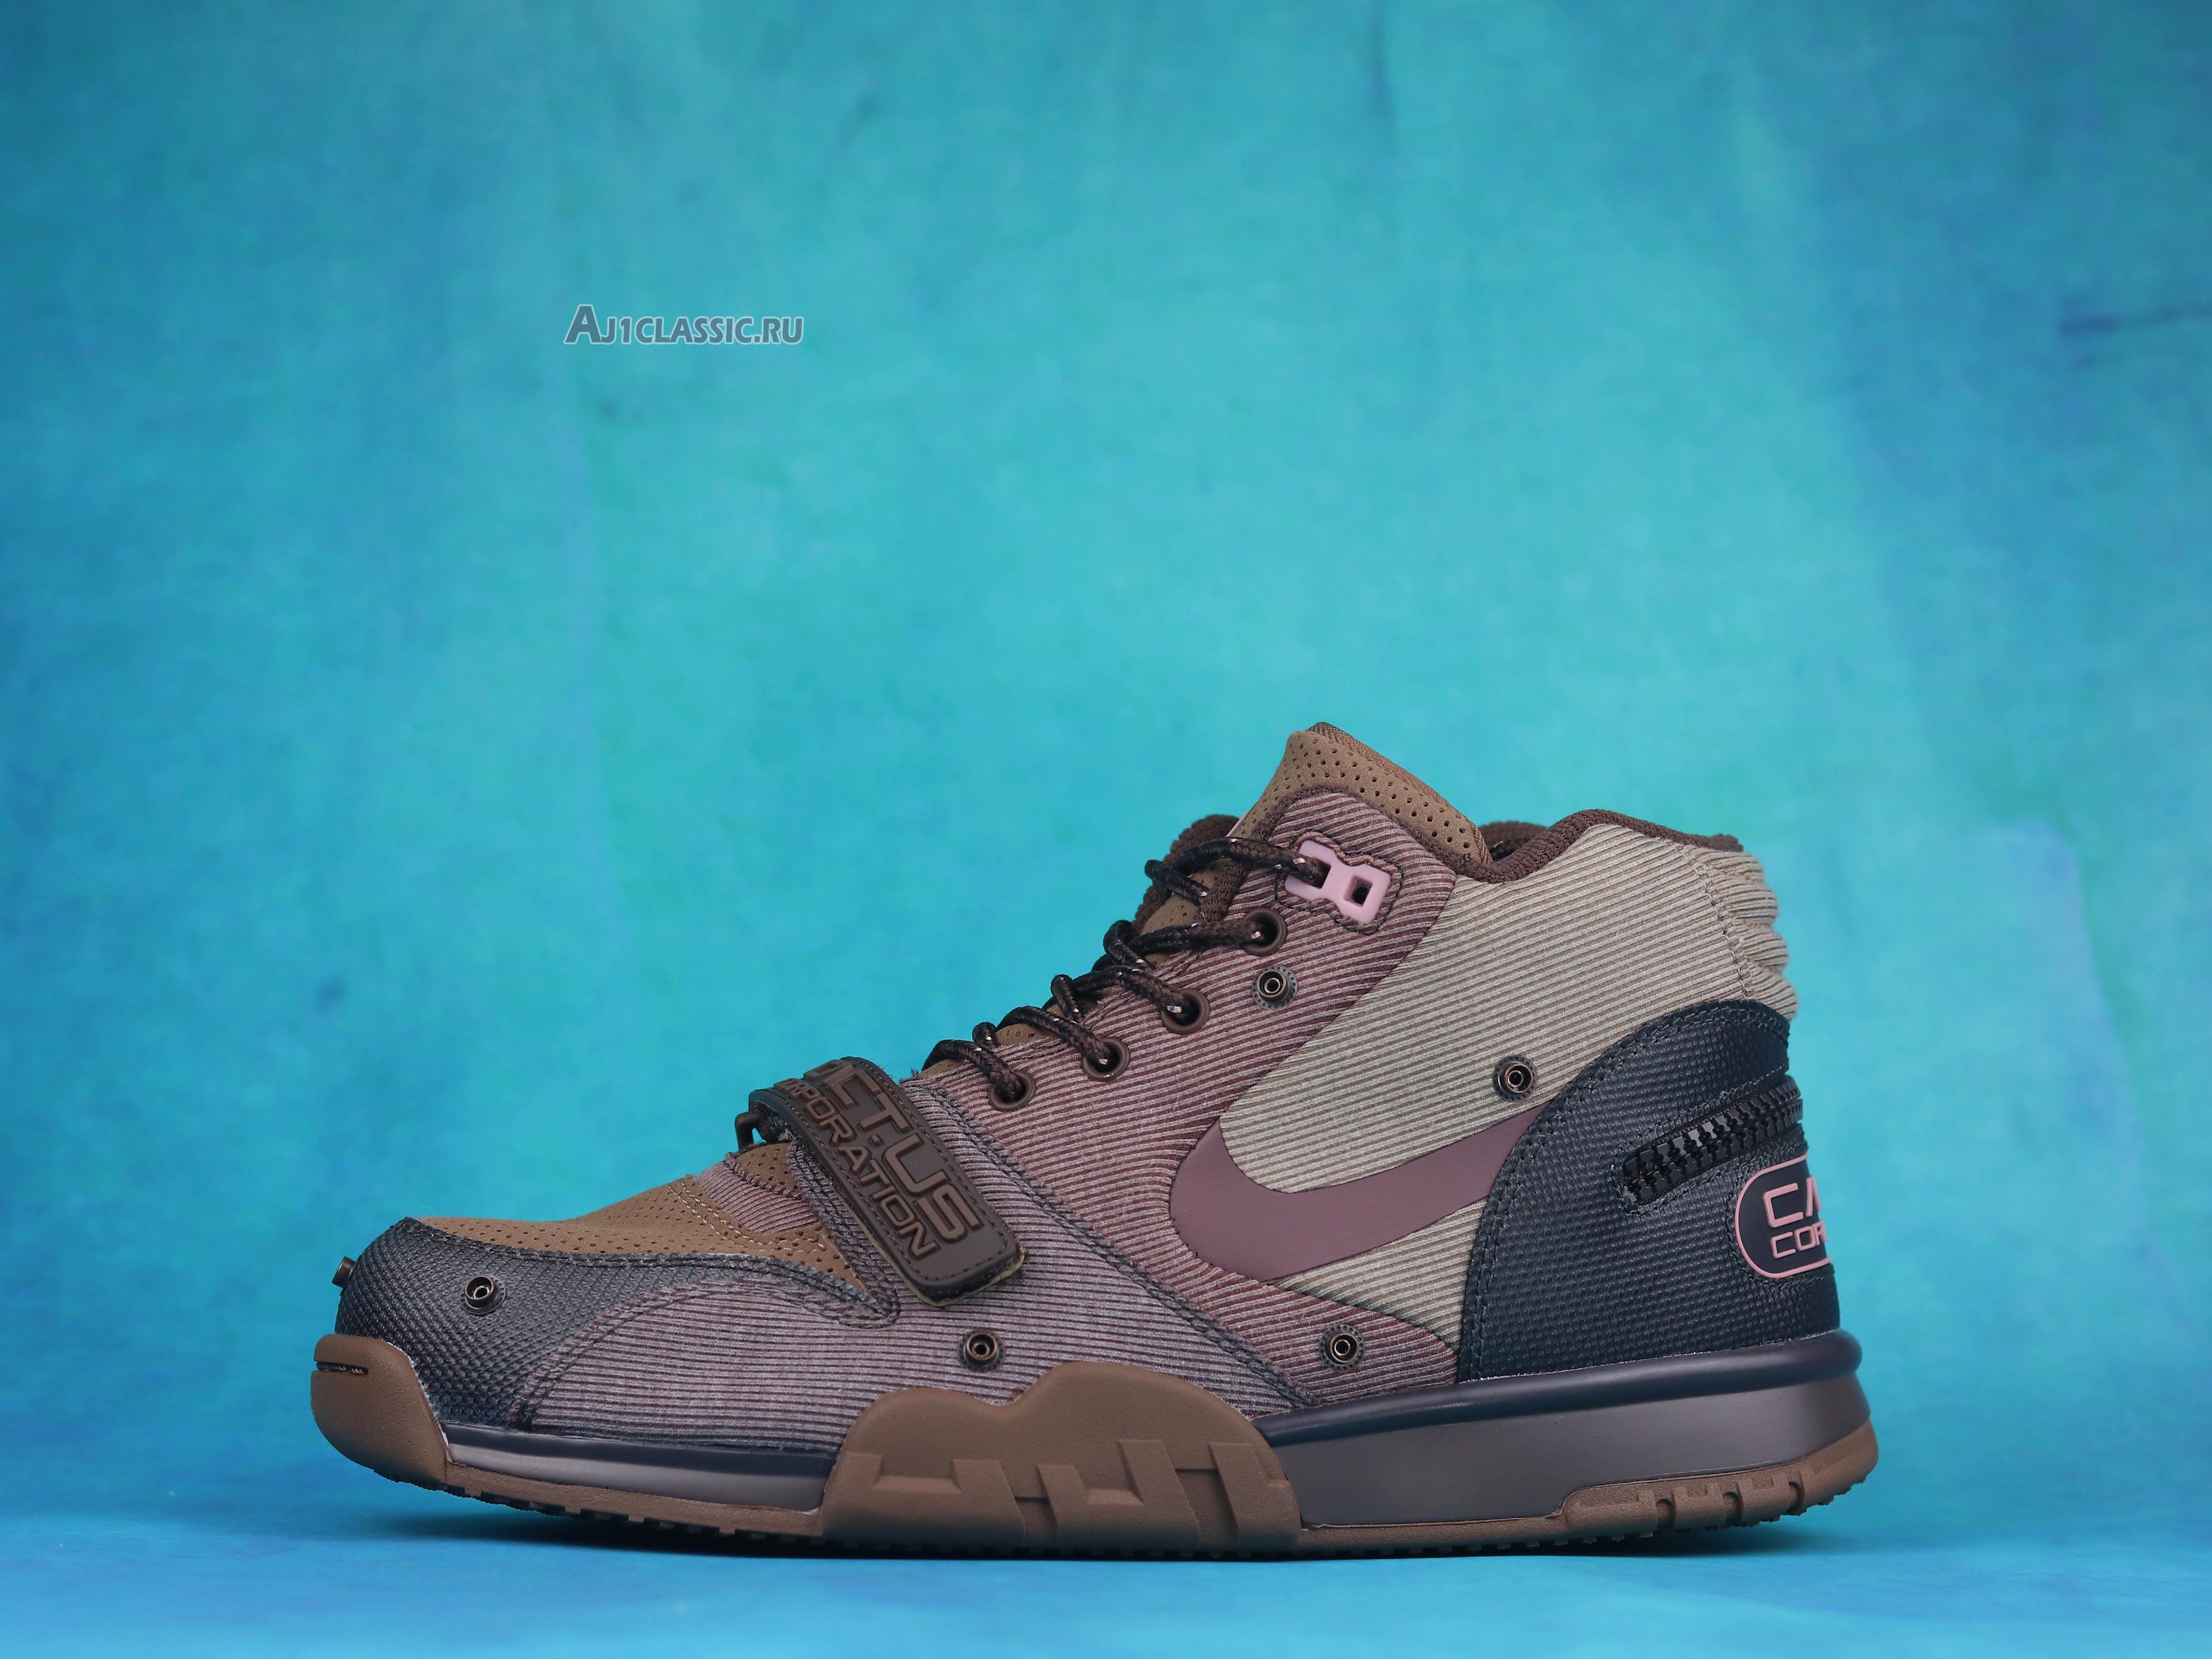 Travis Scott x Air Trainer 1 SP Chocolate DR7515-200 Light Chocolate/Rust Pink/Archaeo Brown Sneakers